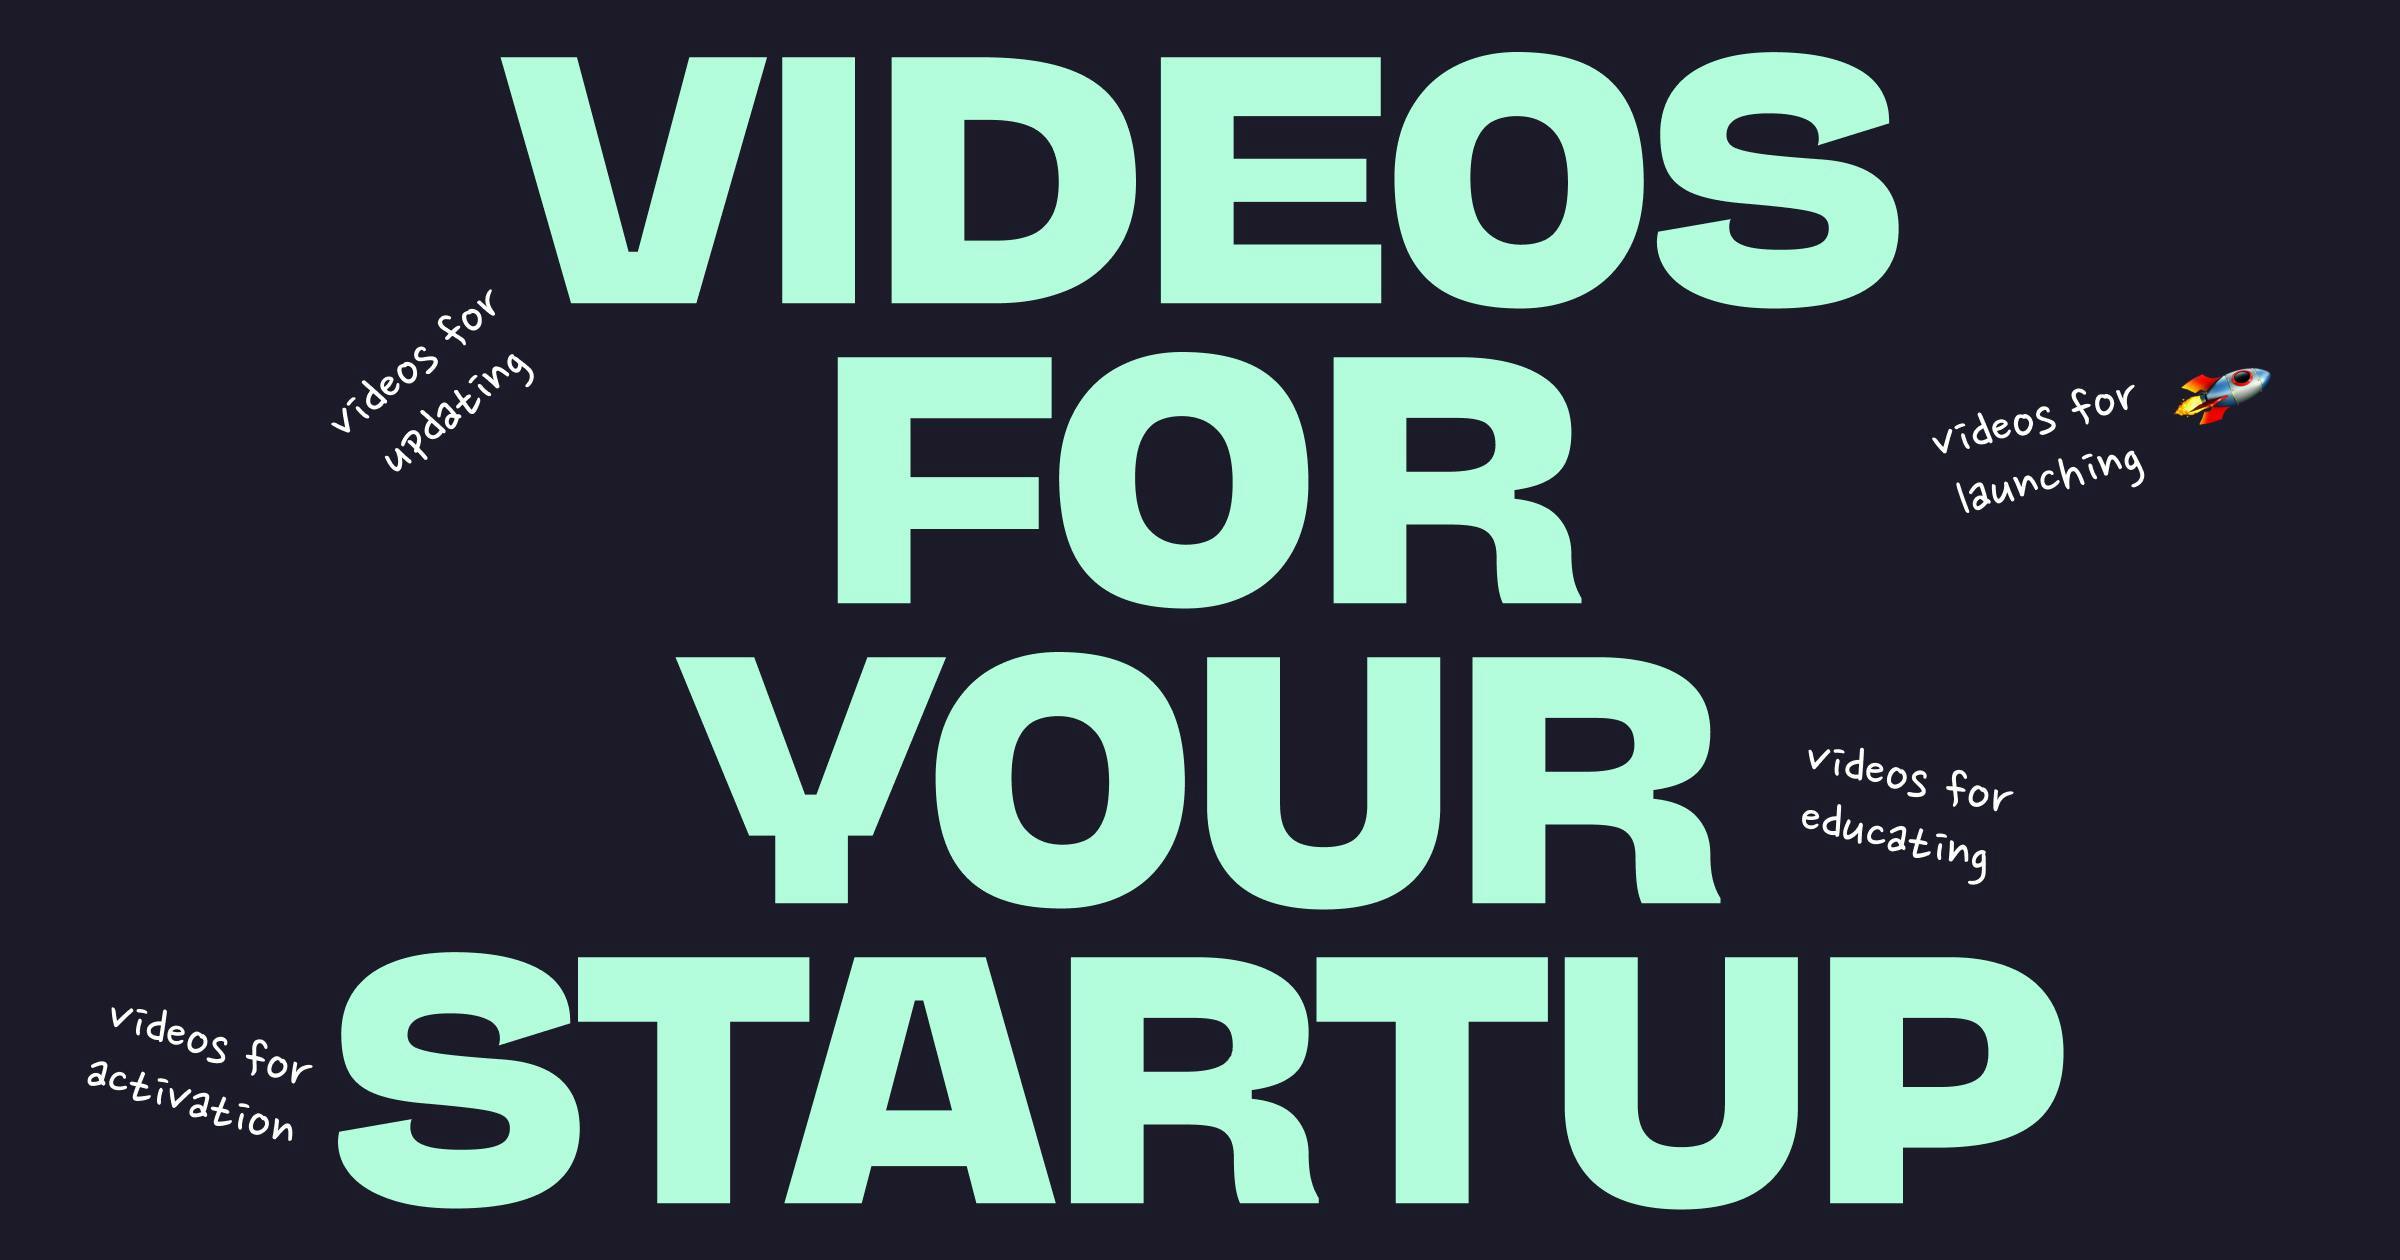 Create product demos, knowledge base videos, and sales videos for your startup.